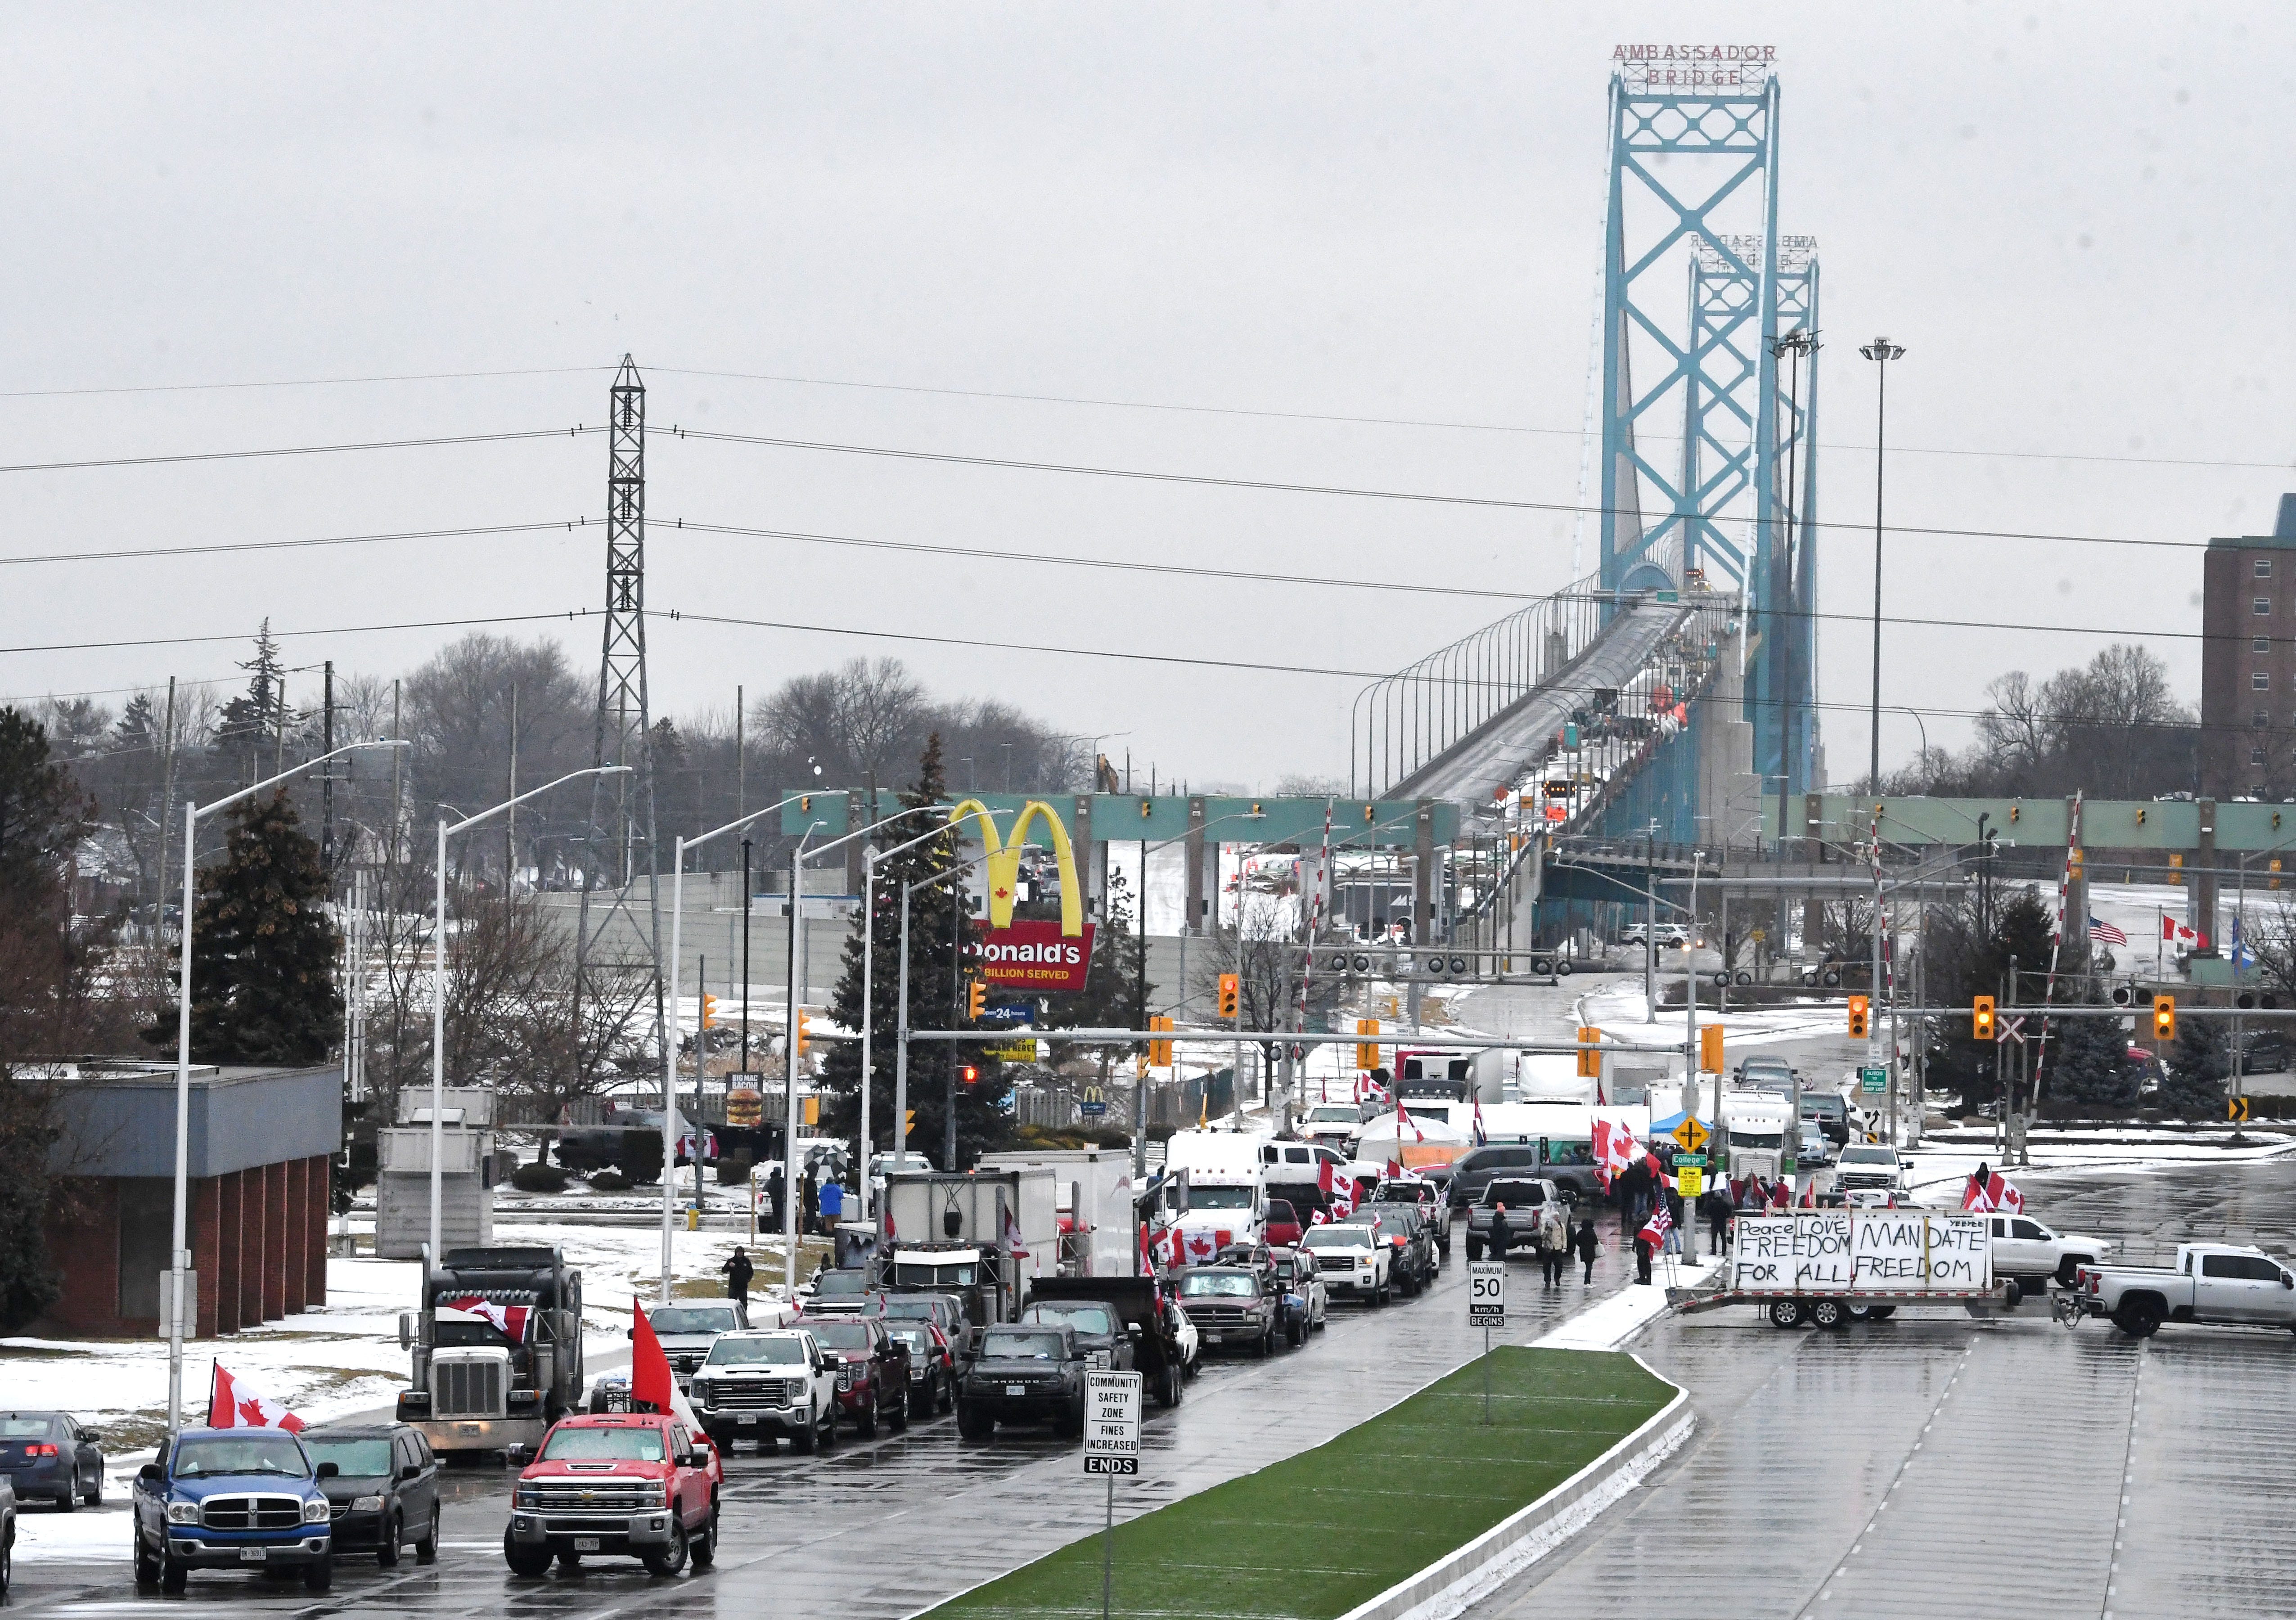 Canadian truckers protest on corner of Huron Church Road and Tecumseh, with the Ambassador Bridge in the background, in Windsor, Canada on February 11, 2022.